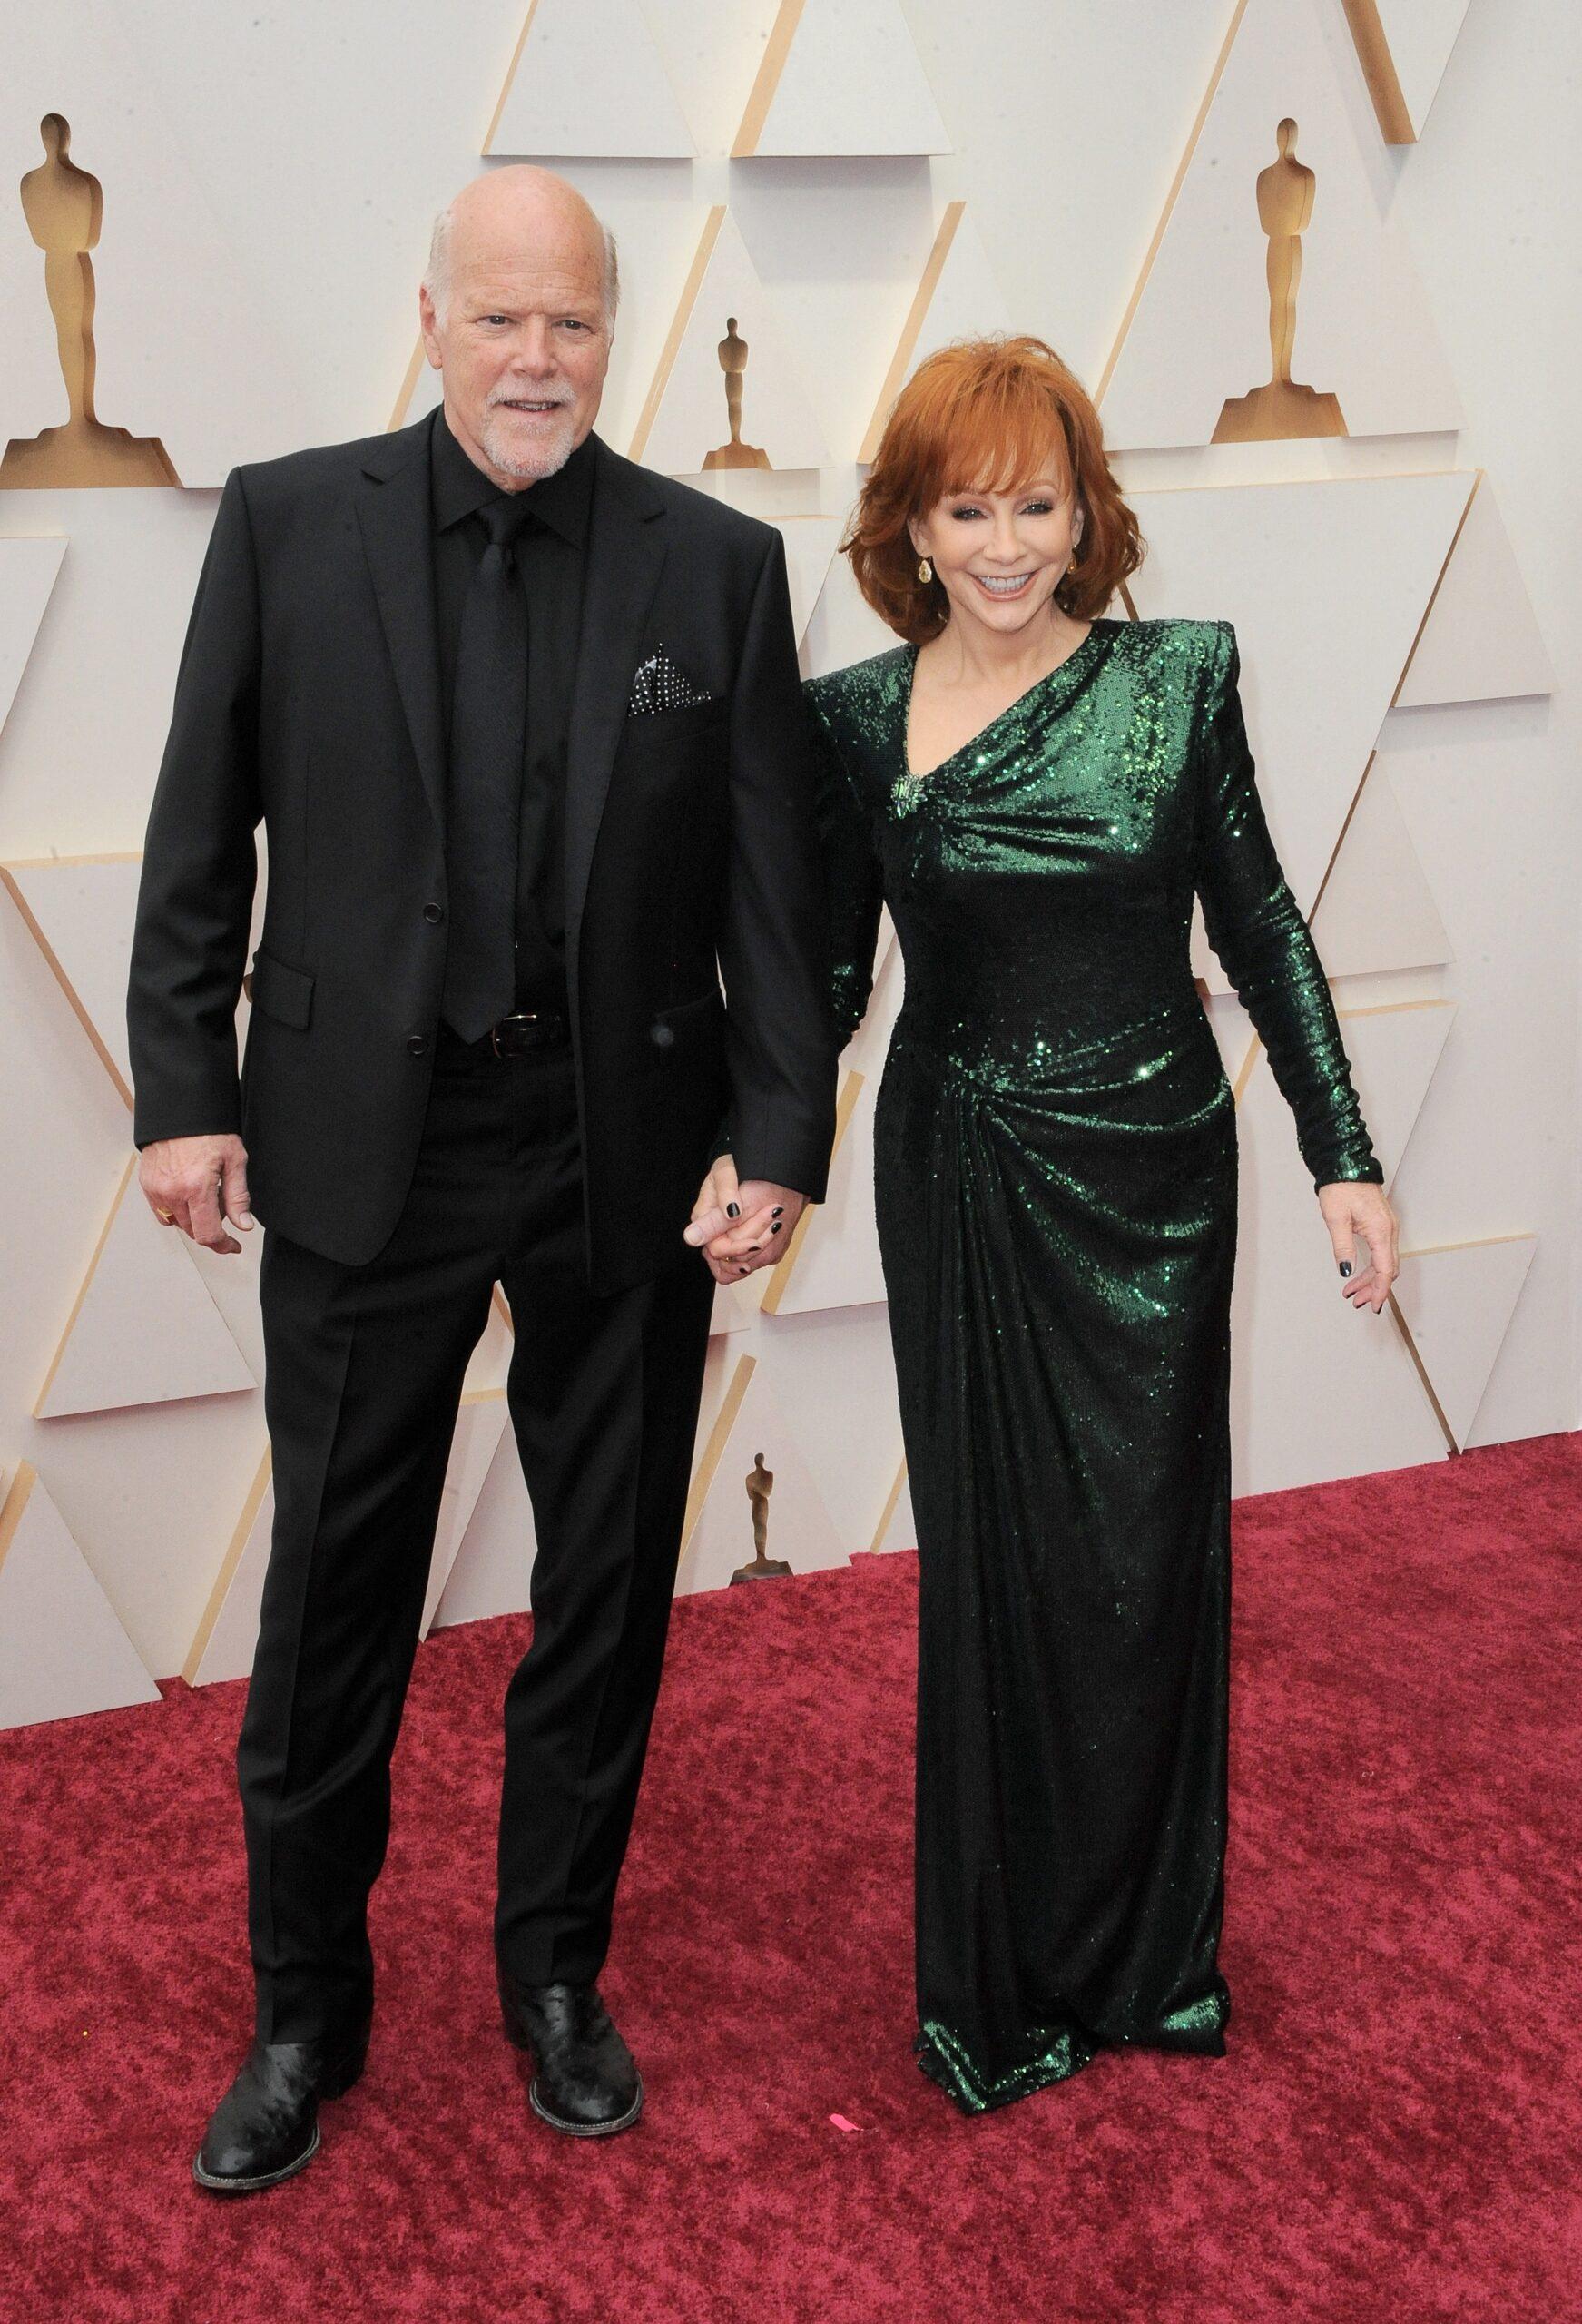 Reba McEntire Is 'OK' Marrying A Third Time If Boyfriend Rex Linn Wants To 'Experience That'